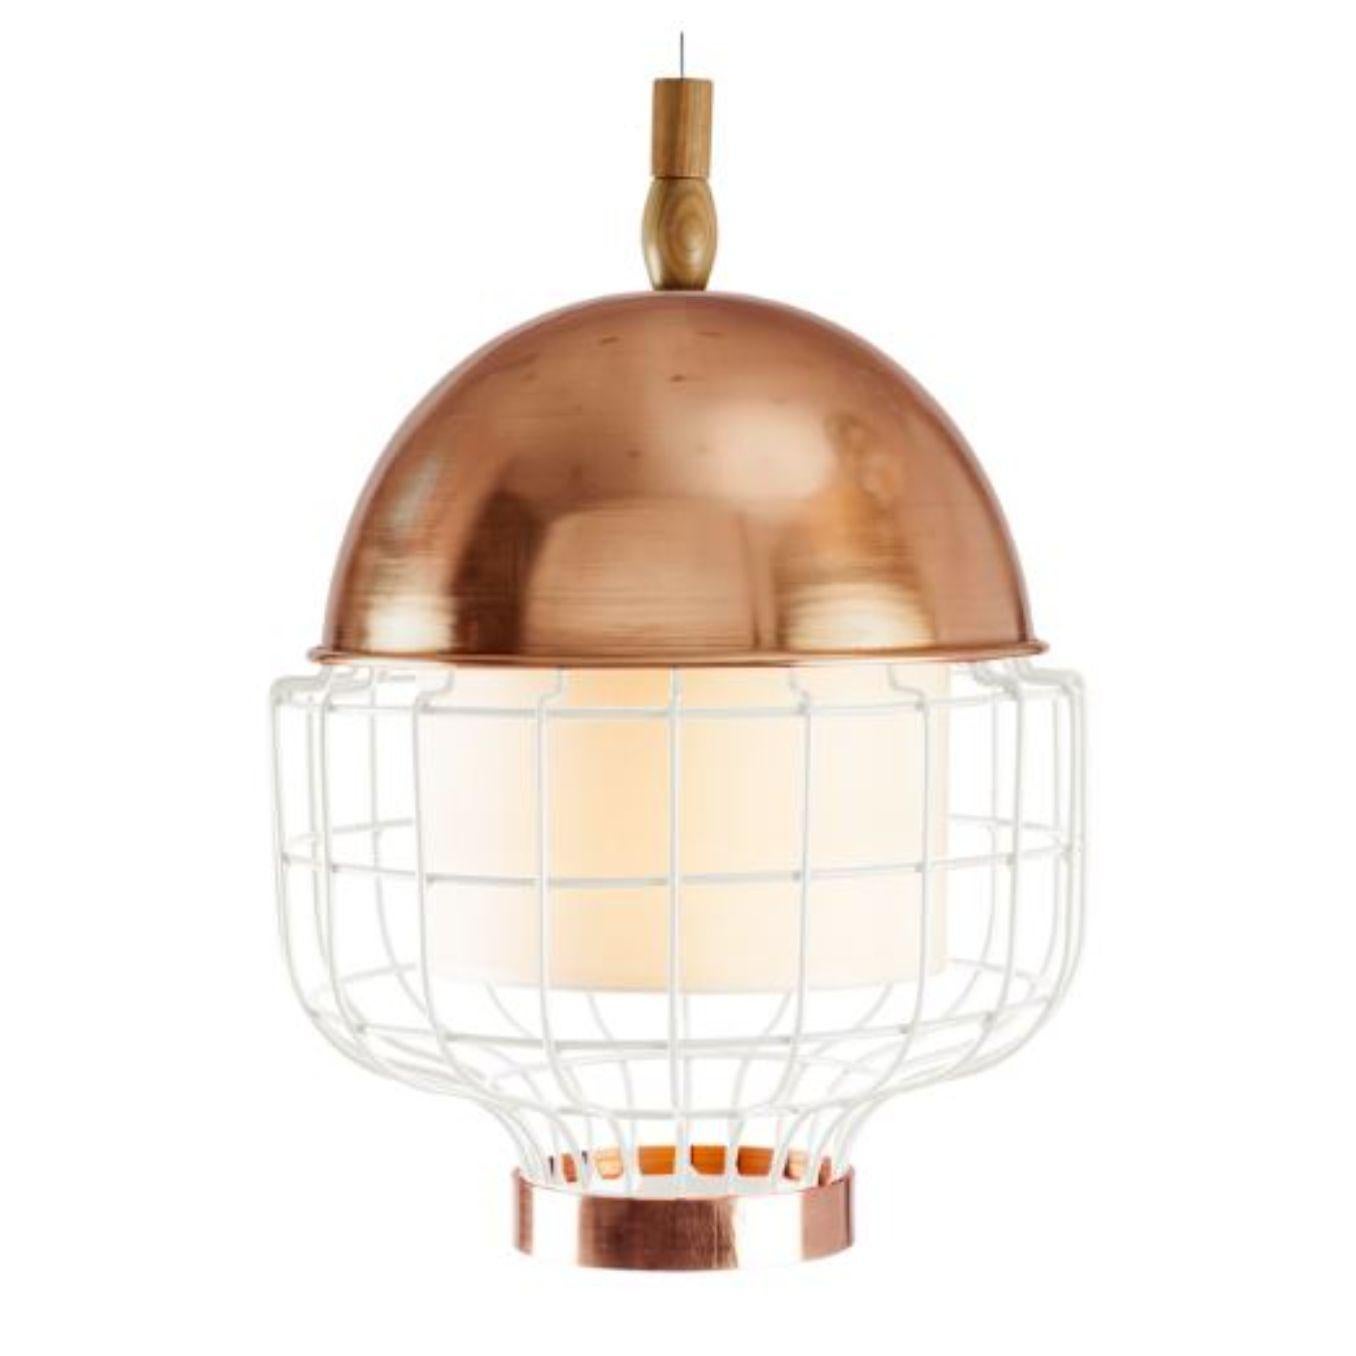 Copper Magnolia III suspension lamp with copper ring by Dooq
Dimensions: W 31 x D 31 x H 42 cm
Materials: lacquered metal, polished or brushed metal, copper.
abat-jour: cotton
Also available in different colours and